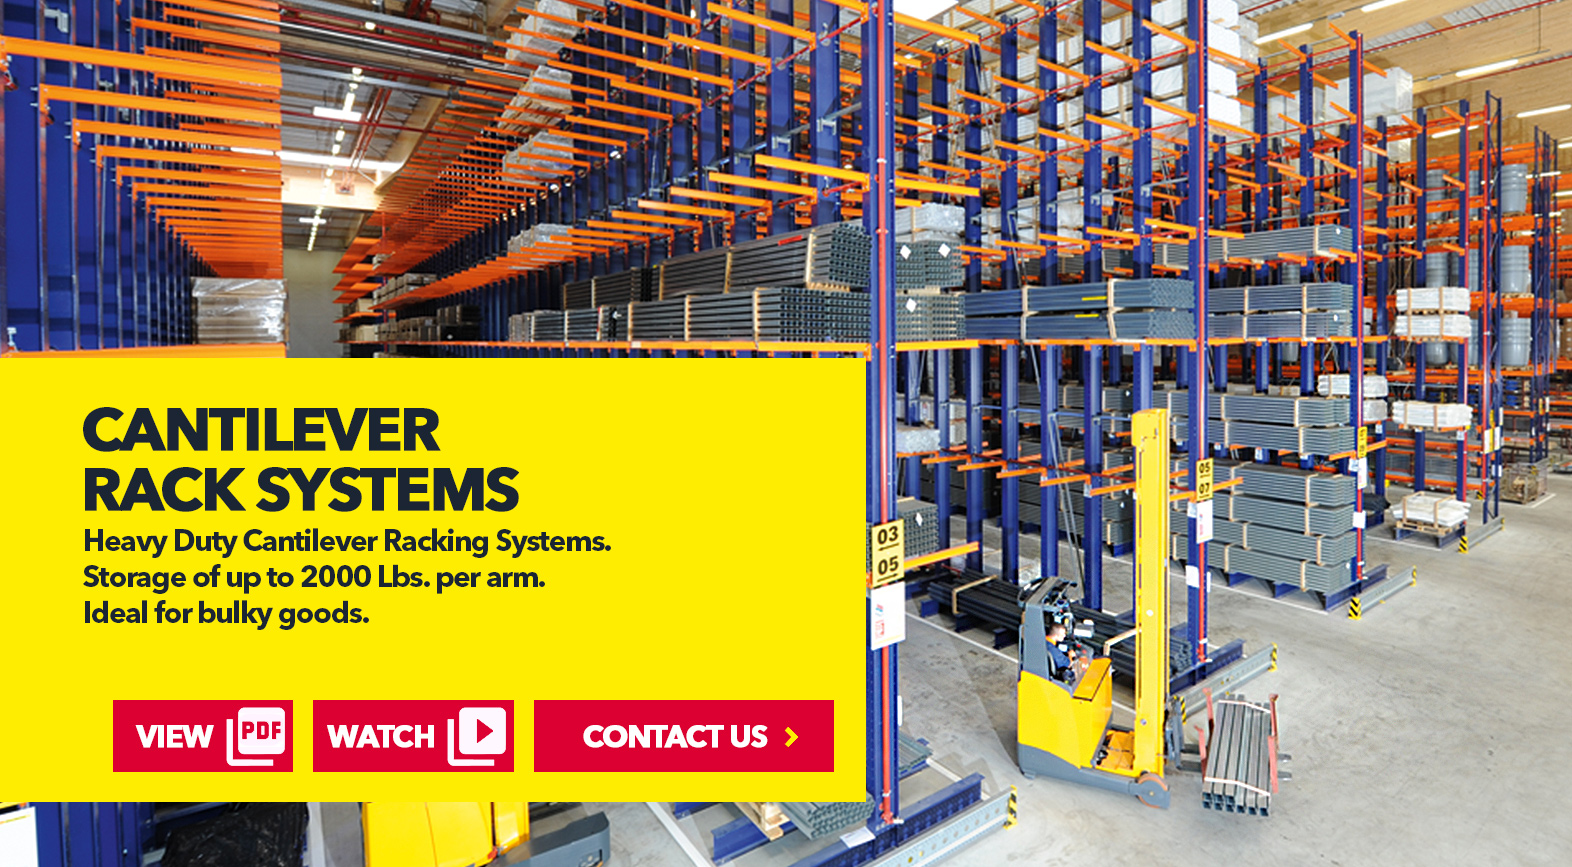 Cantilever Rack Systems by SSI Schaefer USA Download Guide, Watch Video, Contact Us. www.chaefershelving.com